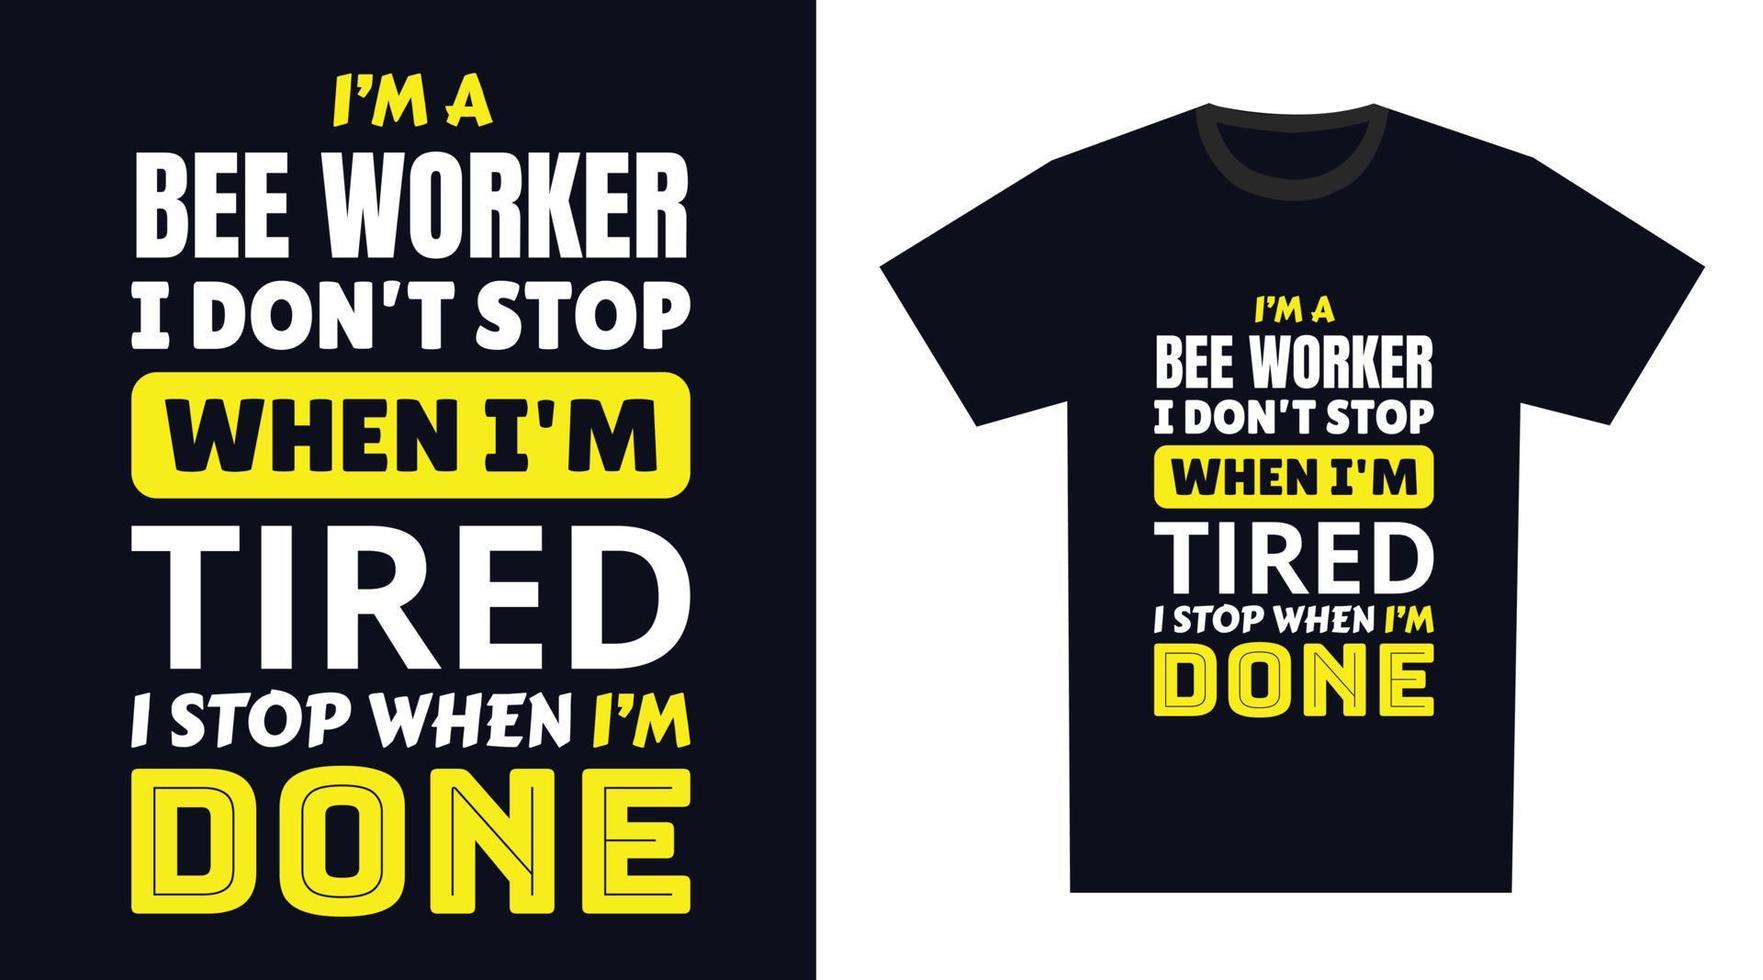 Bee Worker T Shirt Design. I 'm a Bee Worker I Don't Stop When I'm Tired, I Stop When I'm Done vector